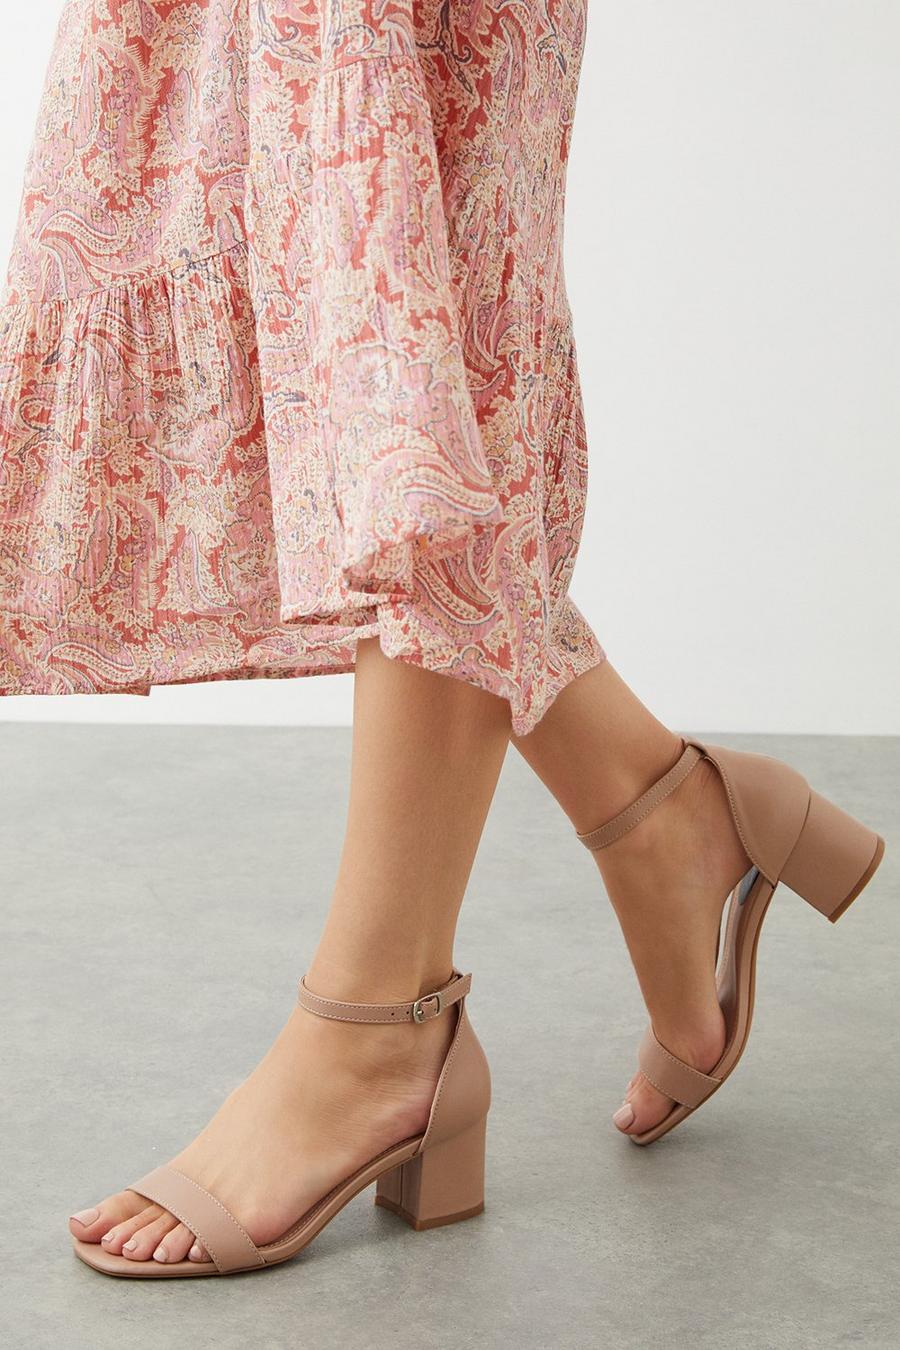 Sammy Low Block Barely There Heels